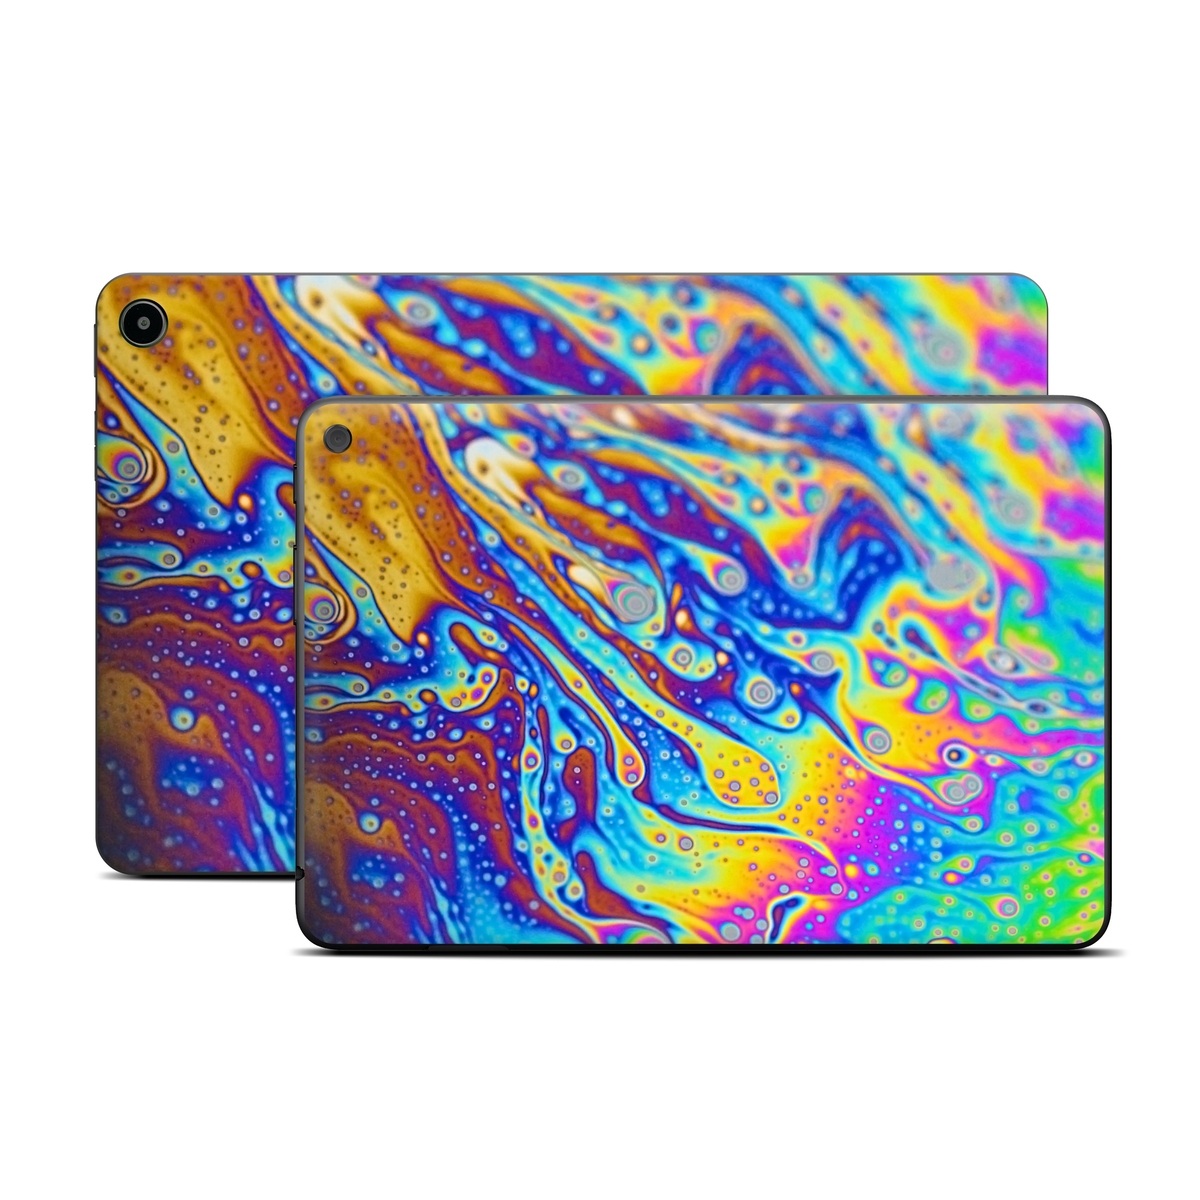 Amazon Fire Tablet Series Skin Skin design of Psychedelic art, Blue, Pattern, Art, Visual arts, Water, Organism, Colorfulness, Design, Textile, with gray, blue, orange, purple, green colors